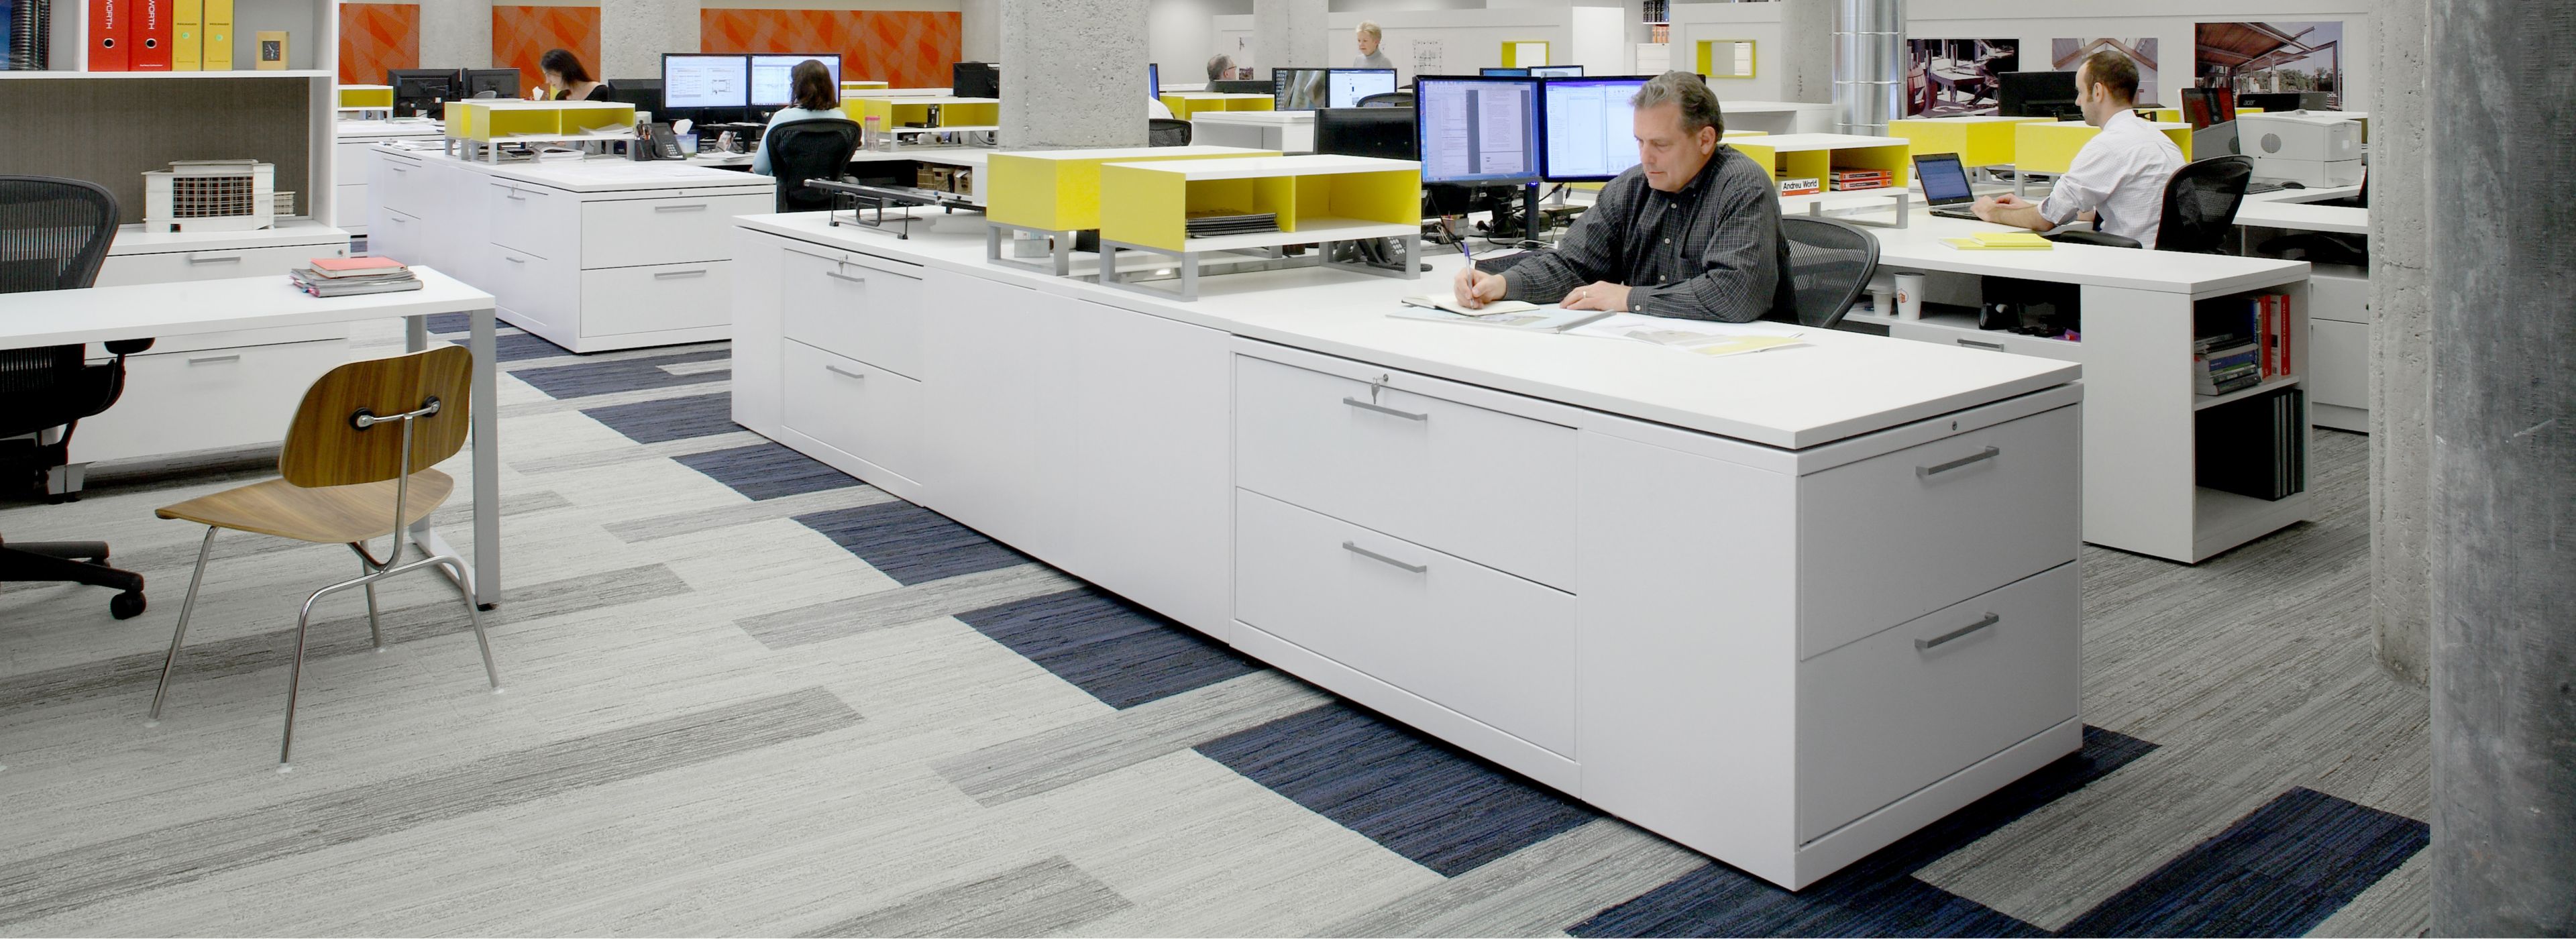 Interface Permian carpet tile in open office with men and women working at desks numéro d’image 1